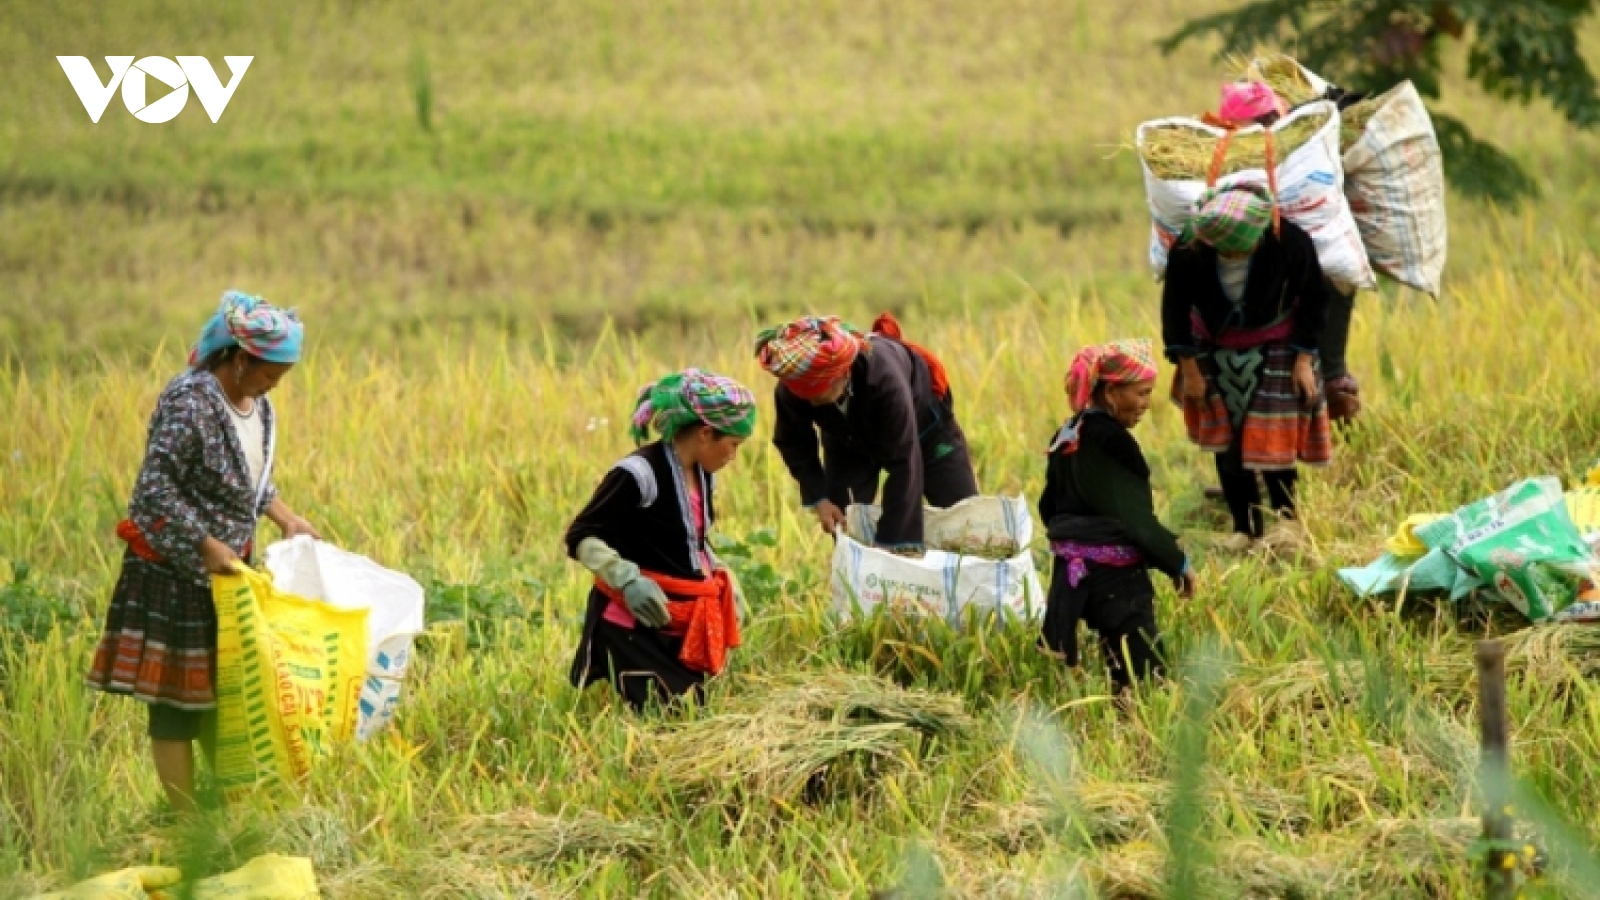 Vietnam prioritises economic growth associated with caring for the poor